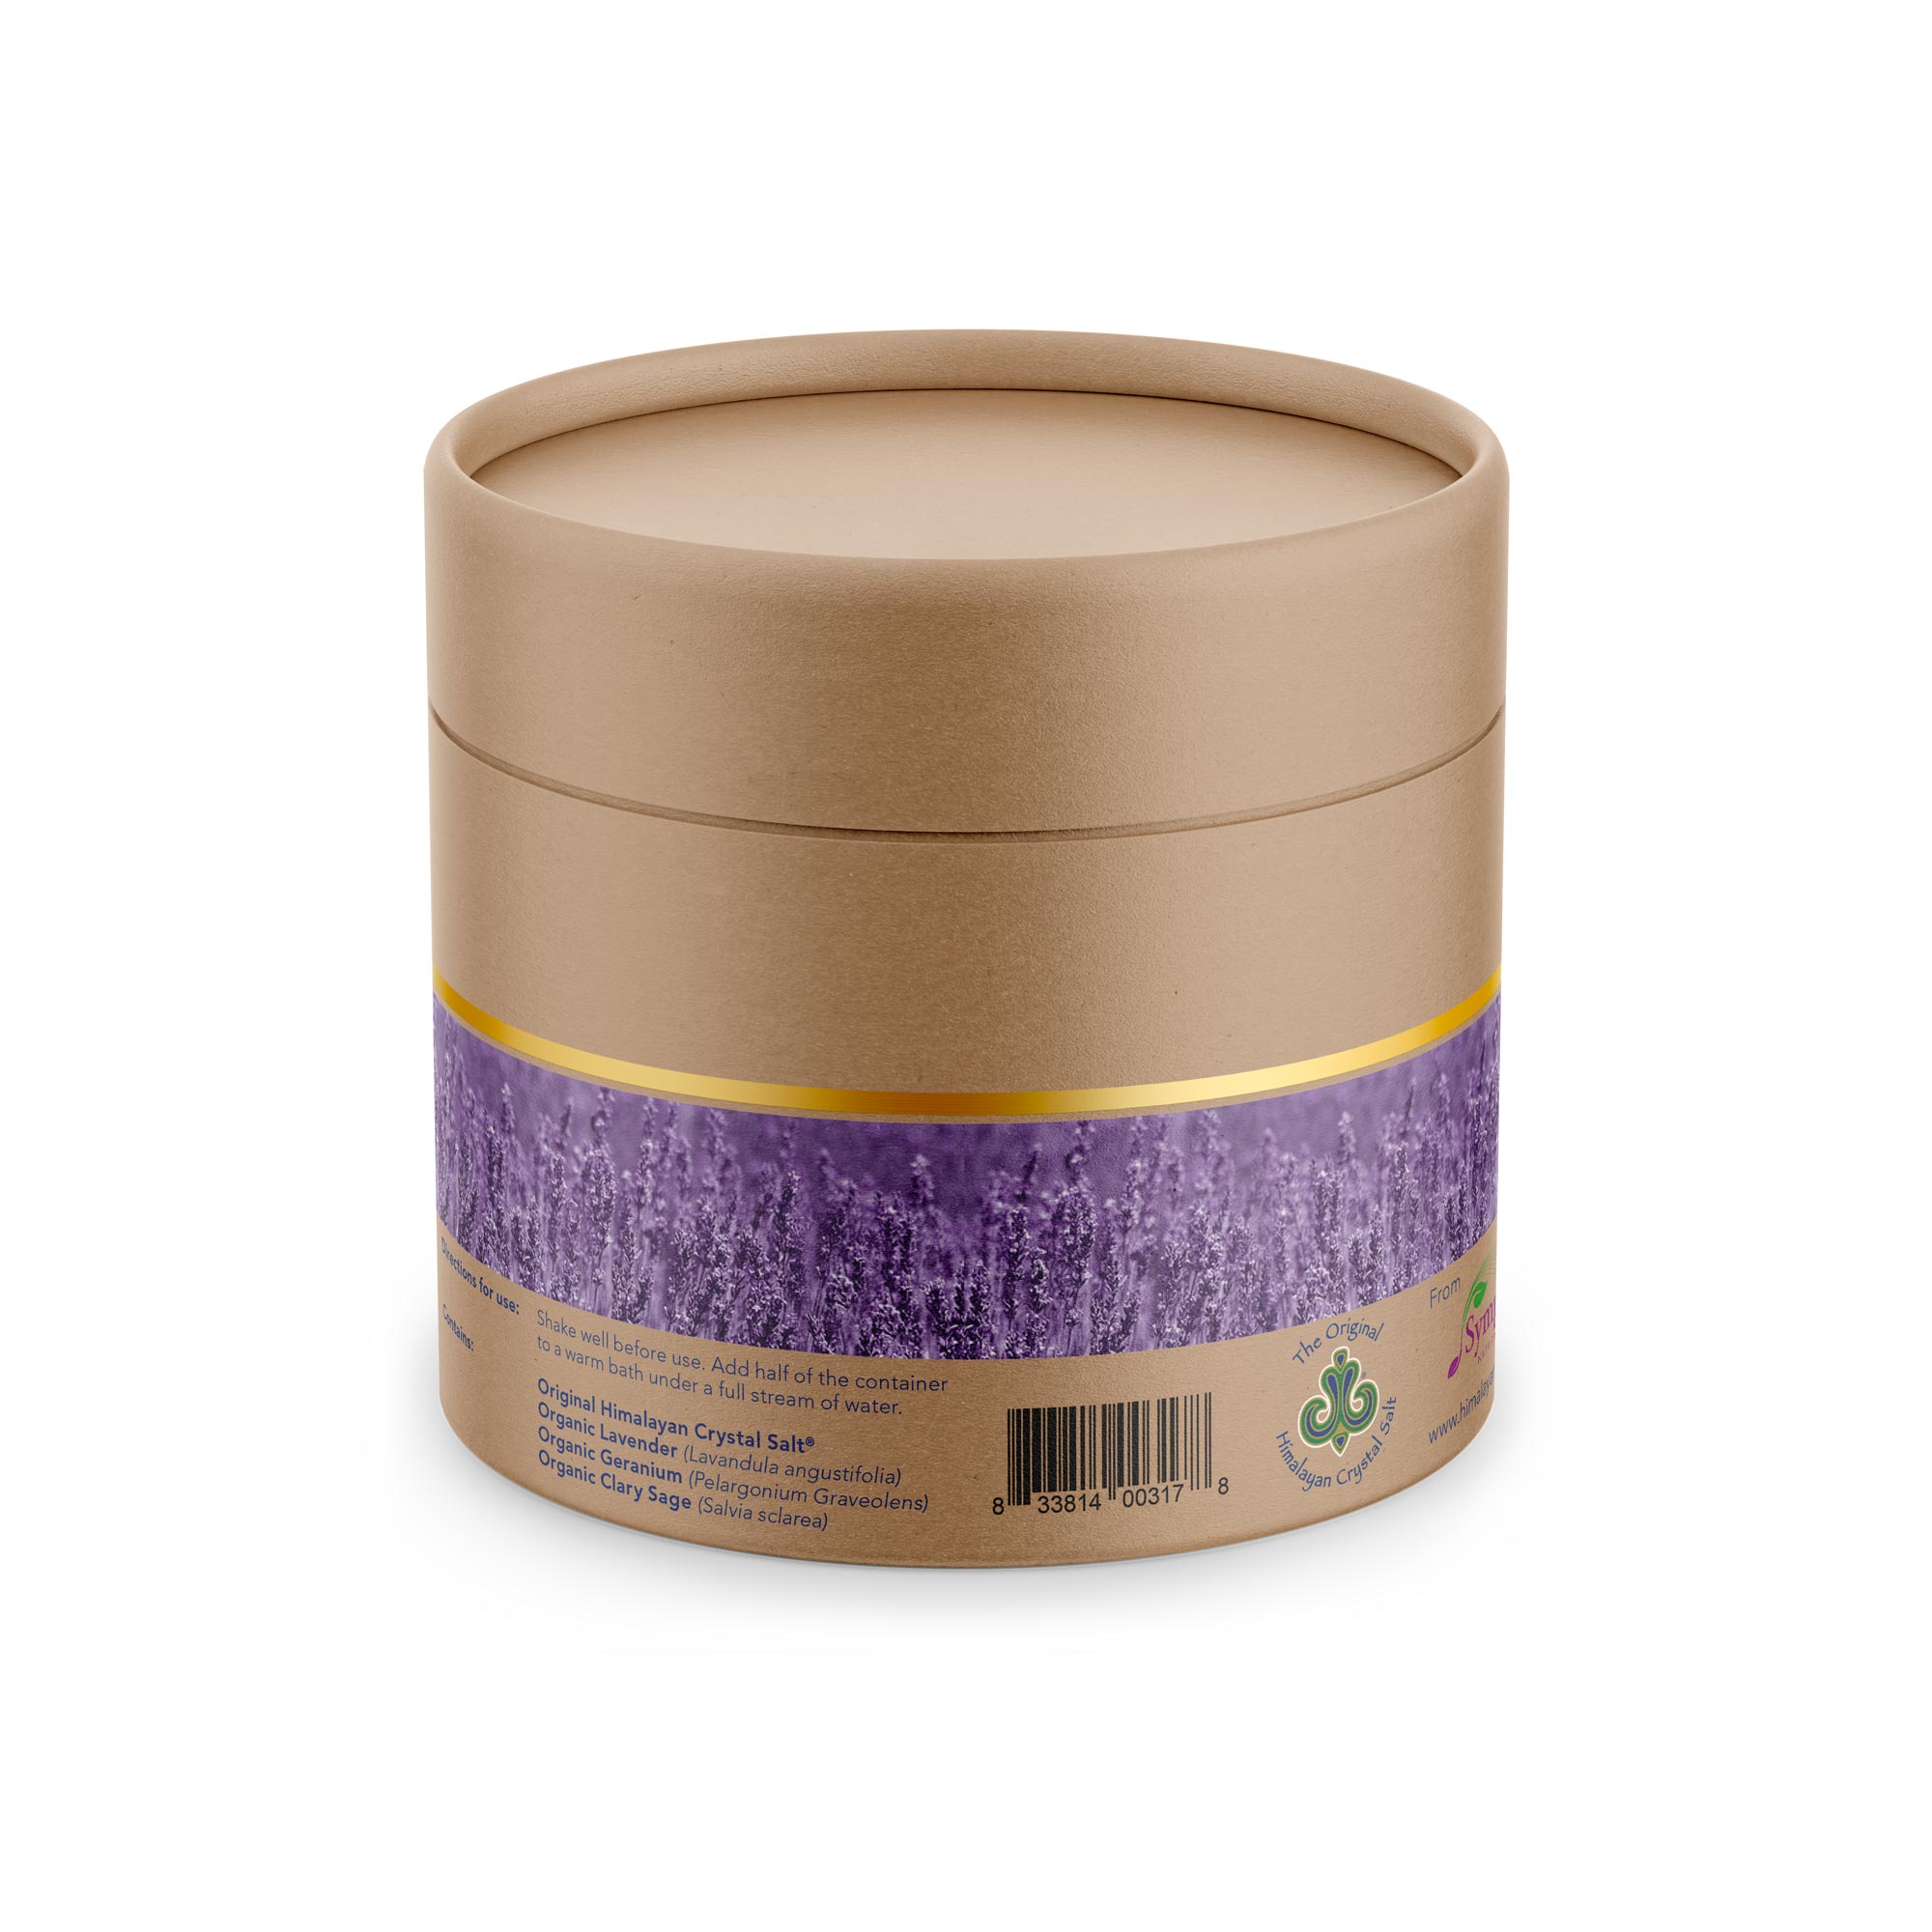 Menopause Bath Salts back of tan product box with bands of gold and lavender flowers featuring Himalayan Crystal Salt logo